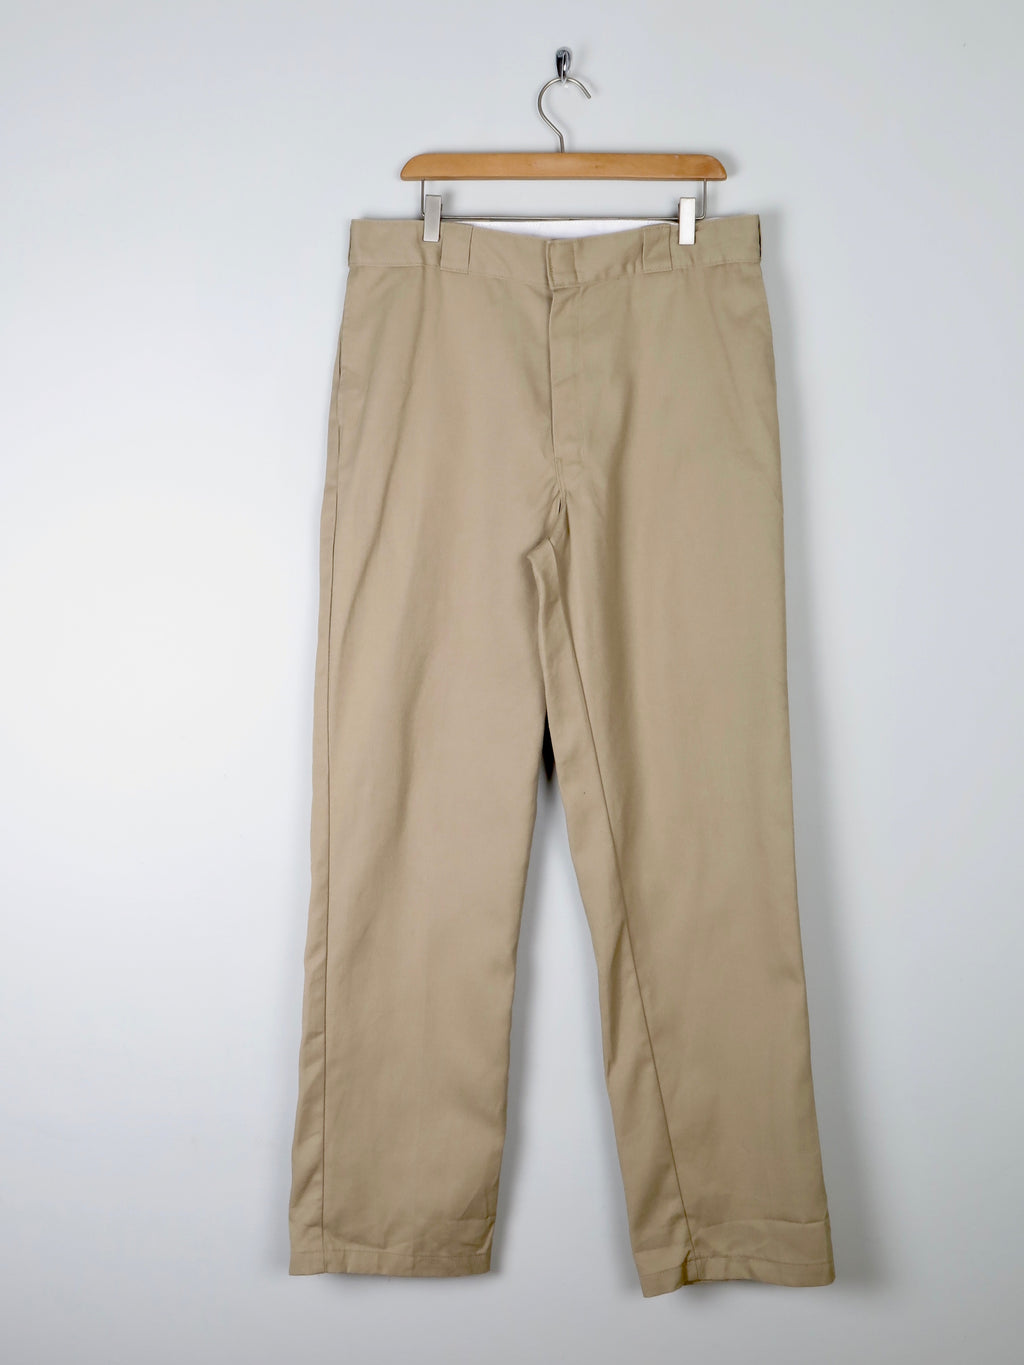 Mens 'Dickies' Beige Classic Fit Trousers 36"